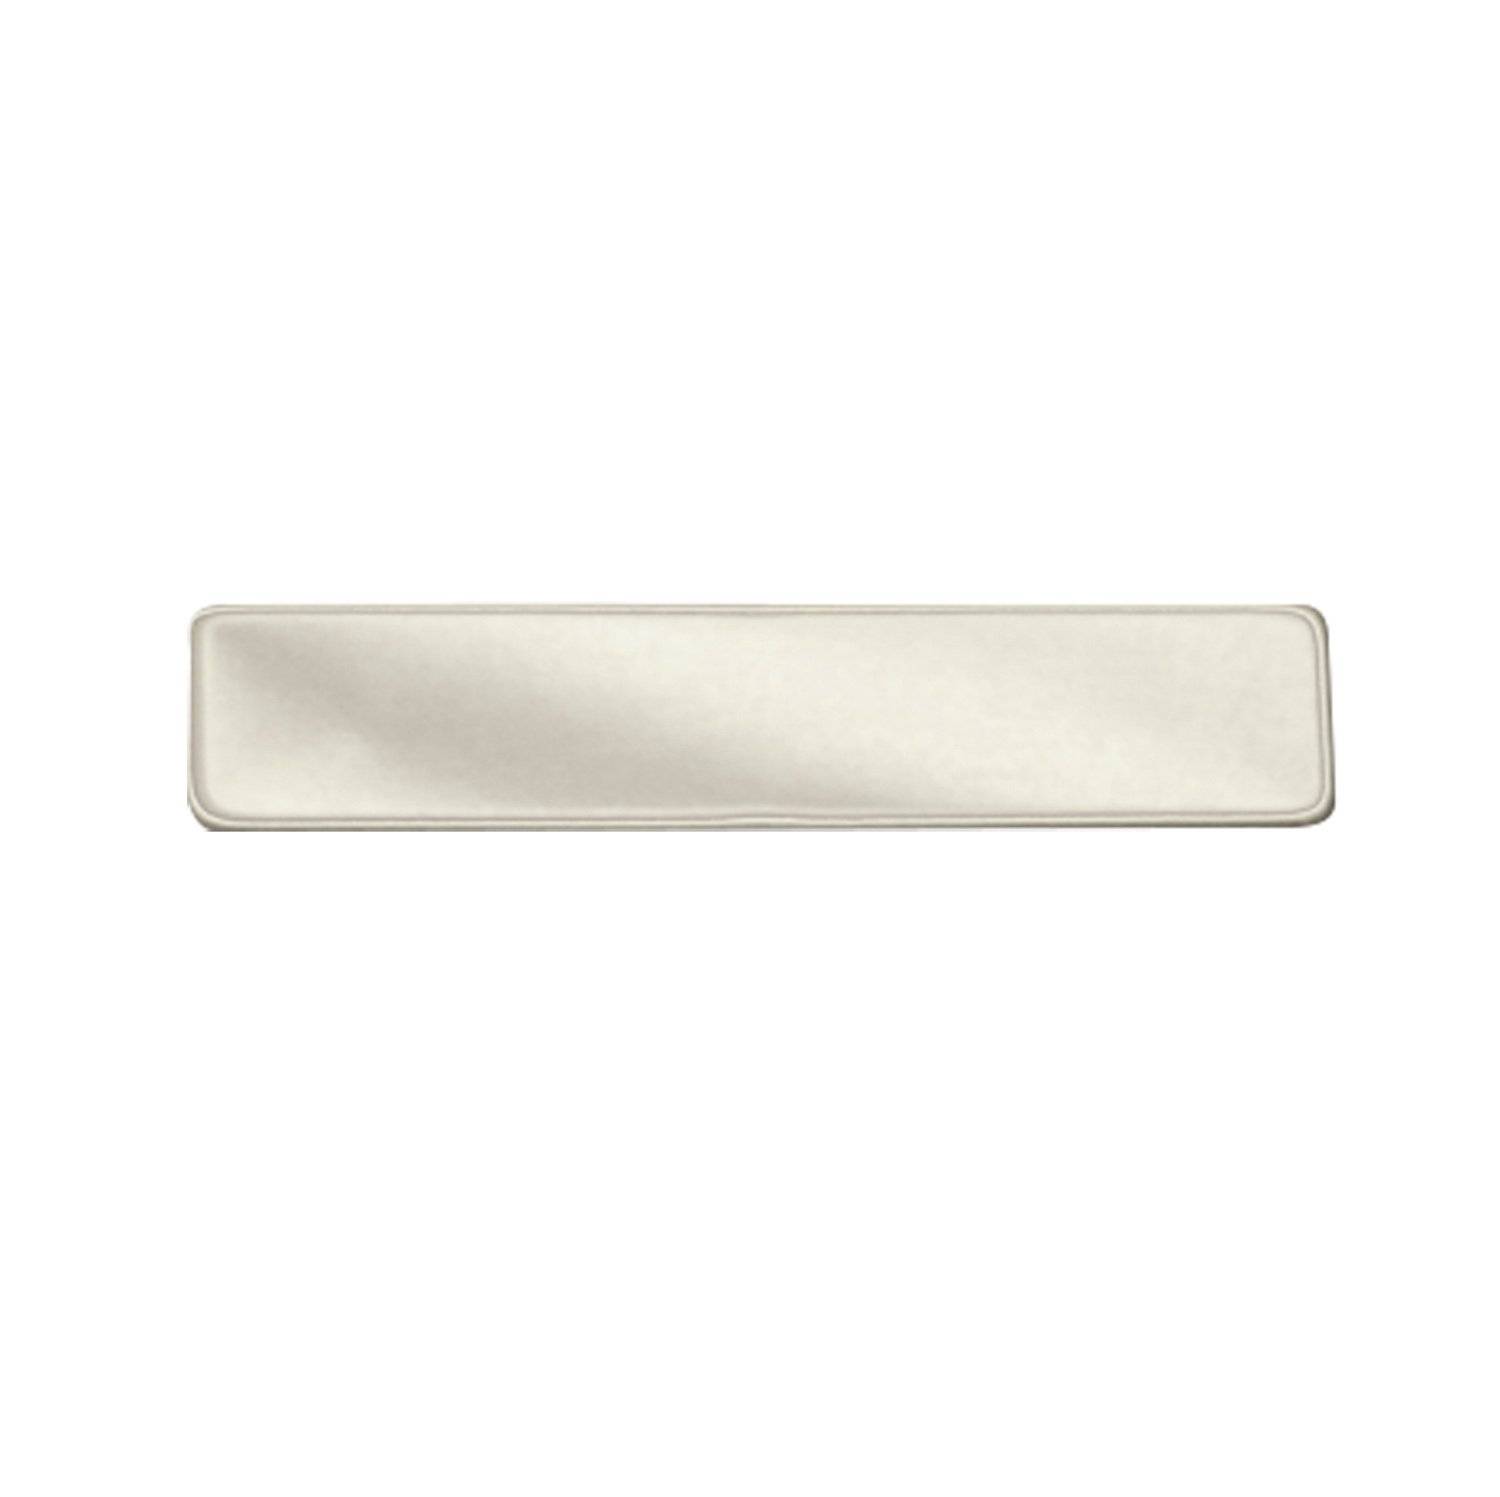 3/8-INCH X 2 1/4-INCH METAL SERVICE BAR NAME TAG WITH CLUTCH